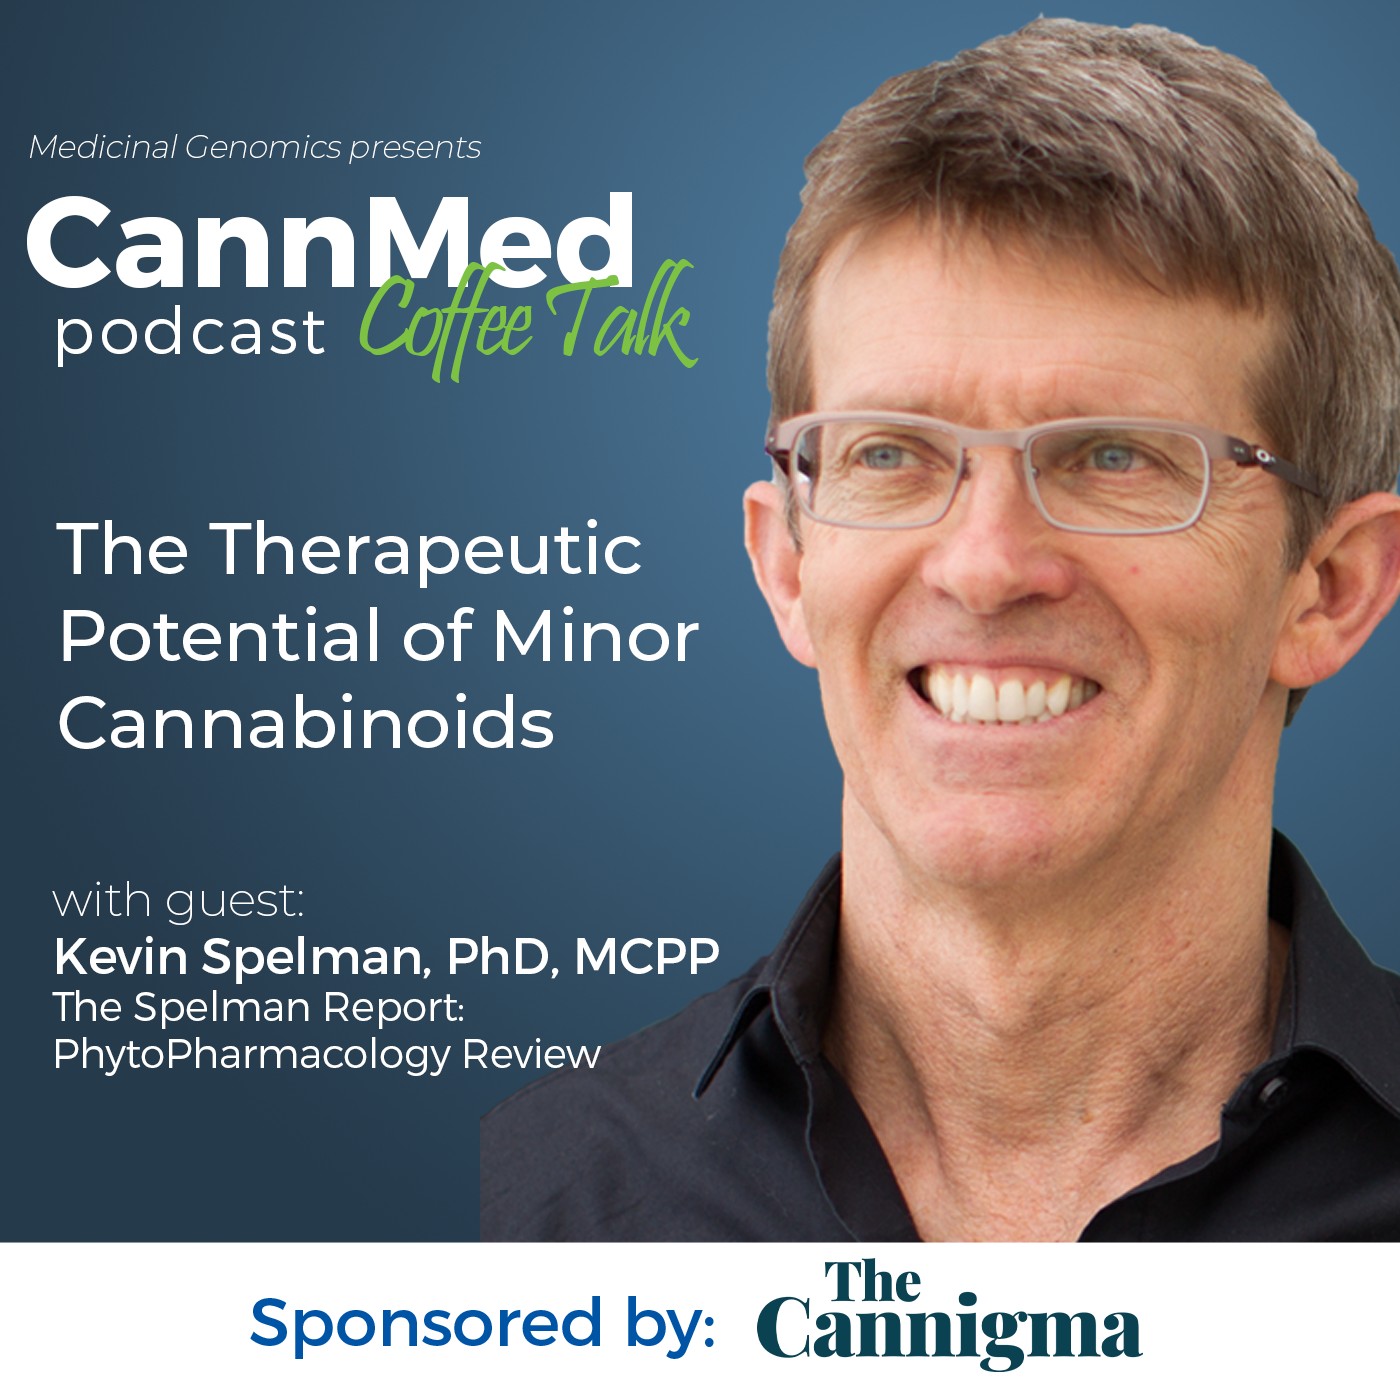 Featured image for “The Therapeutic Potential of Minor Cannabinoids with Kevin Spelman, PhD”